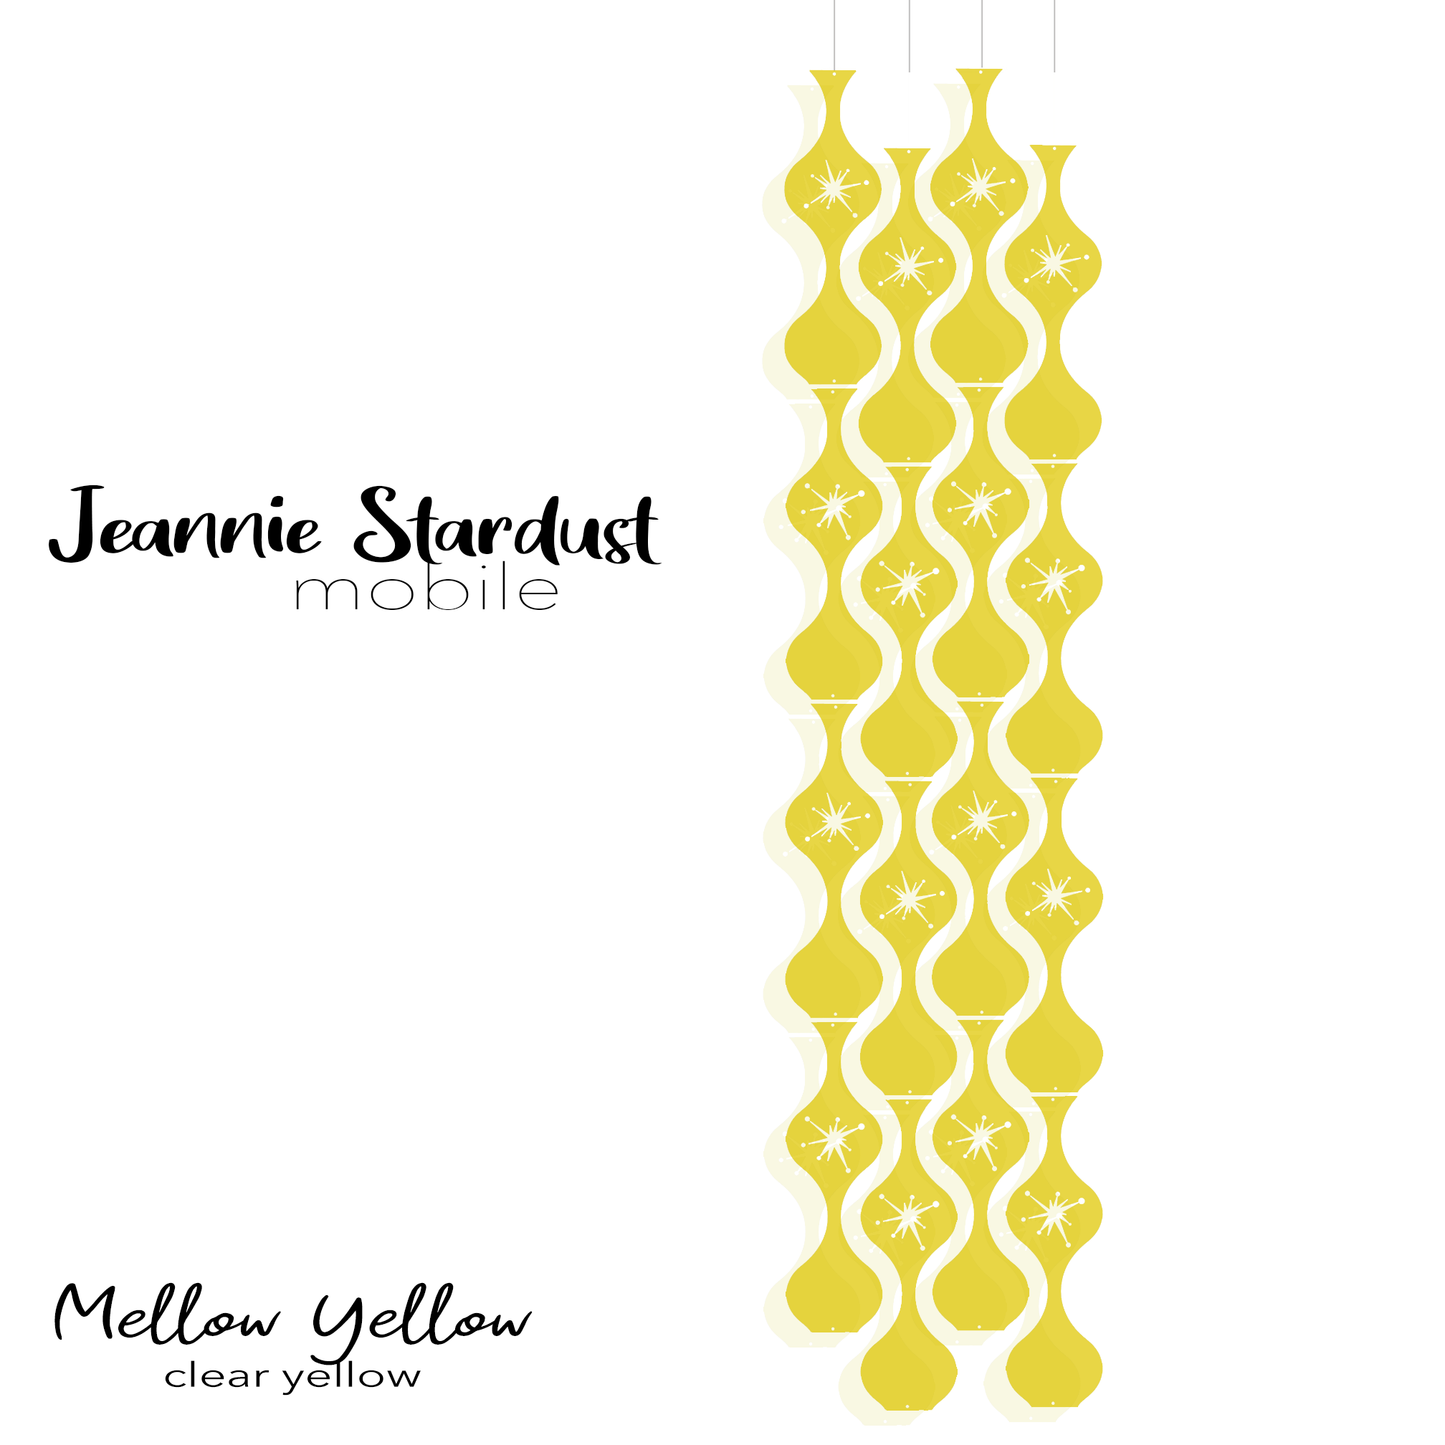  Jeannie Stardust Mellow Yellow - Clear yellow plexiglass acrylic hanging art mobiles in mid century modern style for home decor by AtomicMobiles.com